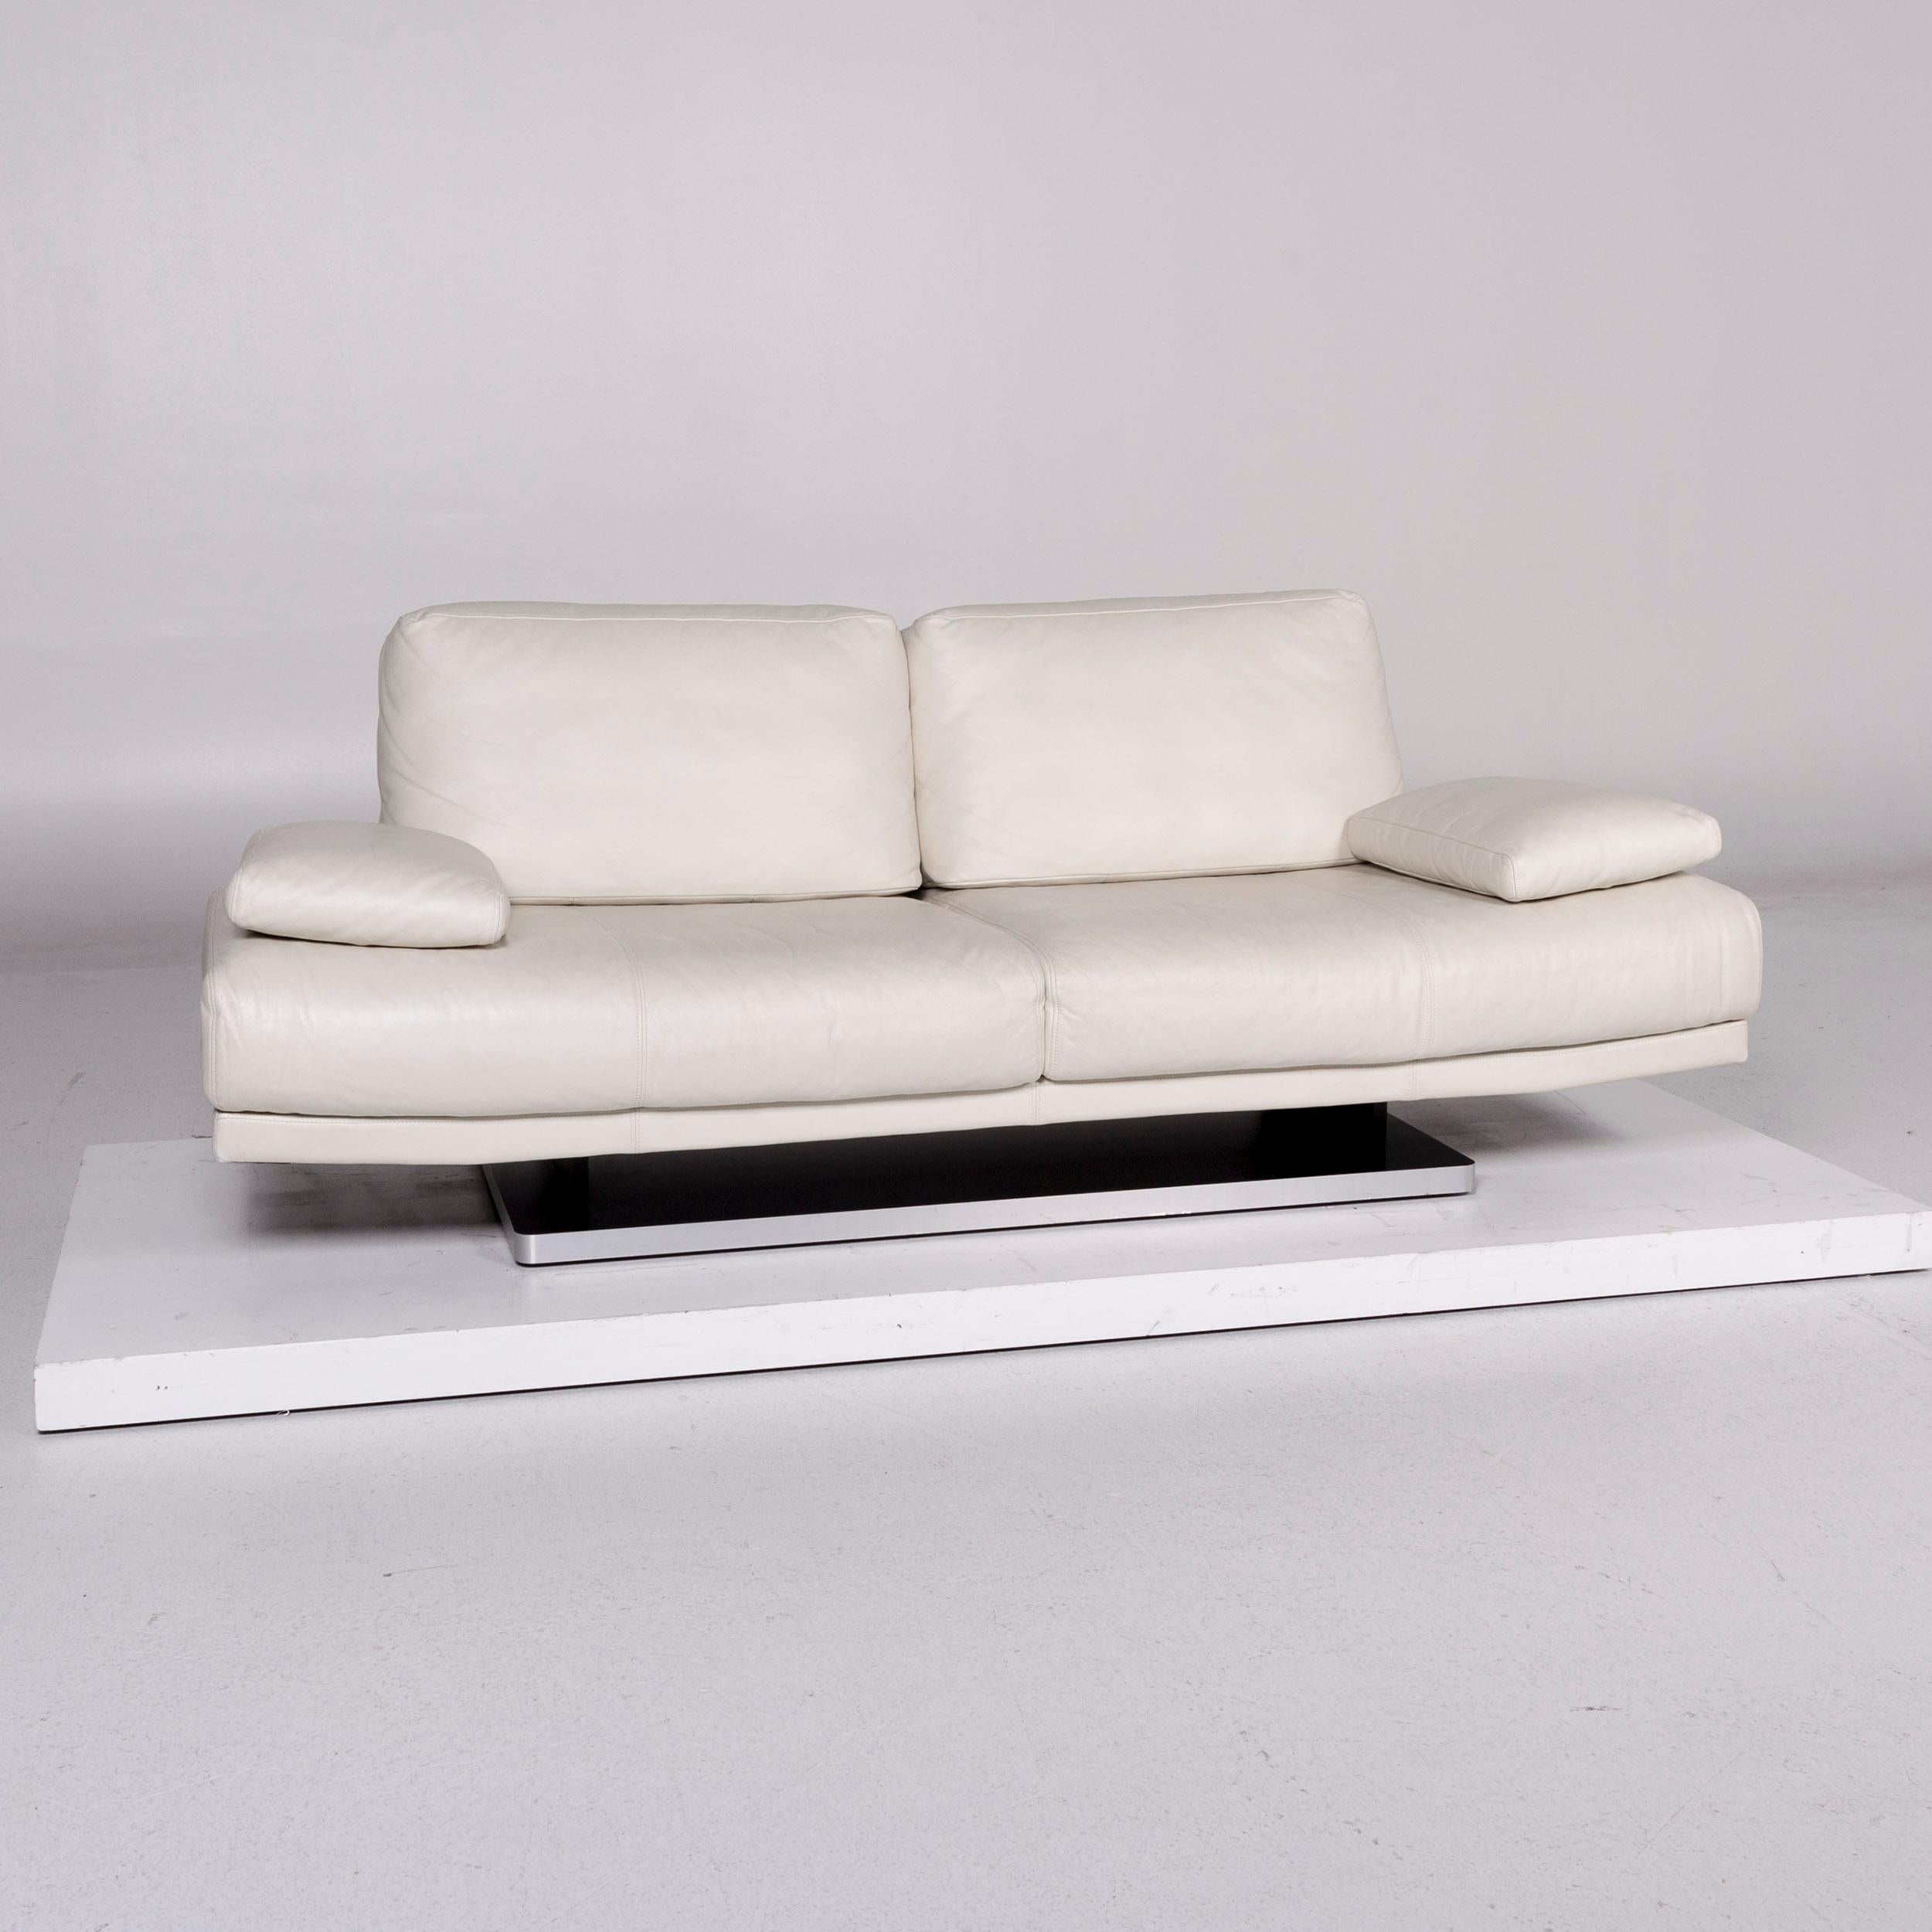 We bring to you a Rolf Benz Rolf Benz 345 leather sofa white two-seat couch.

Product measurements in centimetres
 
Depth 94
Width 210
Height 80
Seat-height 42
Rest-height 55
Seat-depth 57
Seat-width 138
Back-height 39.
  